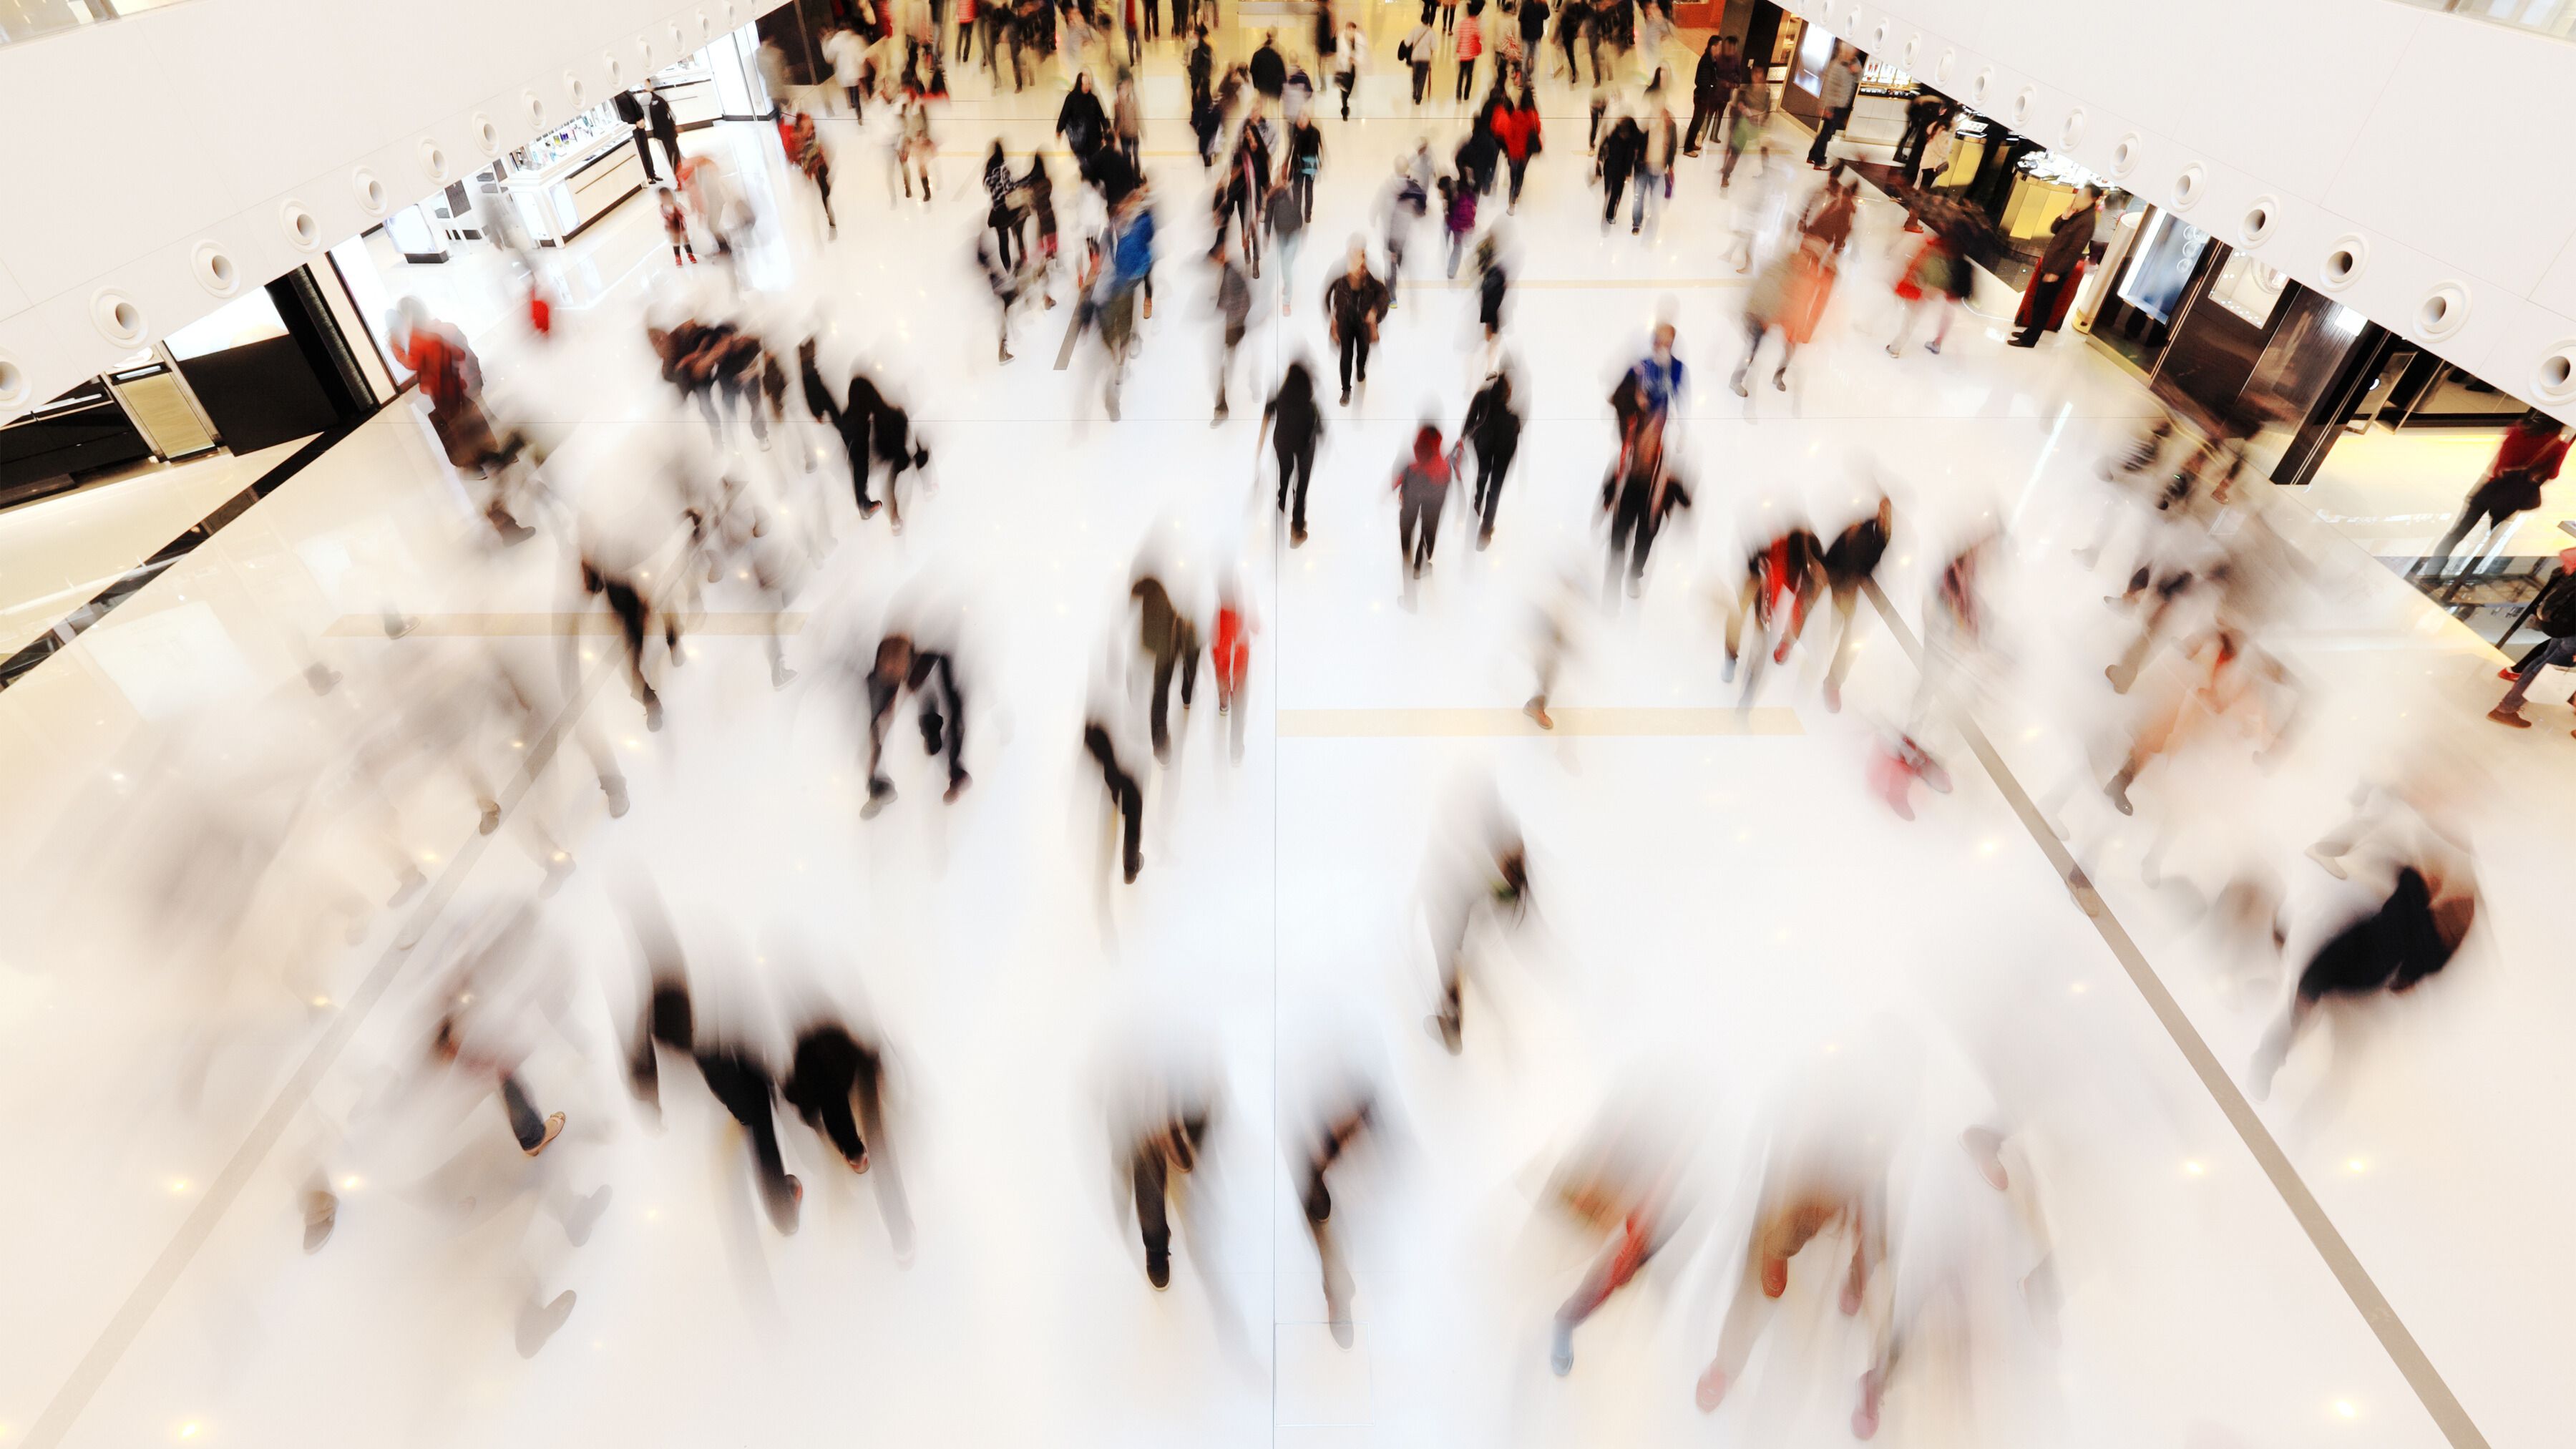 Crowds of people mill about in a shopping mall, blurred out